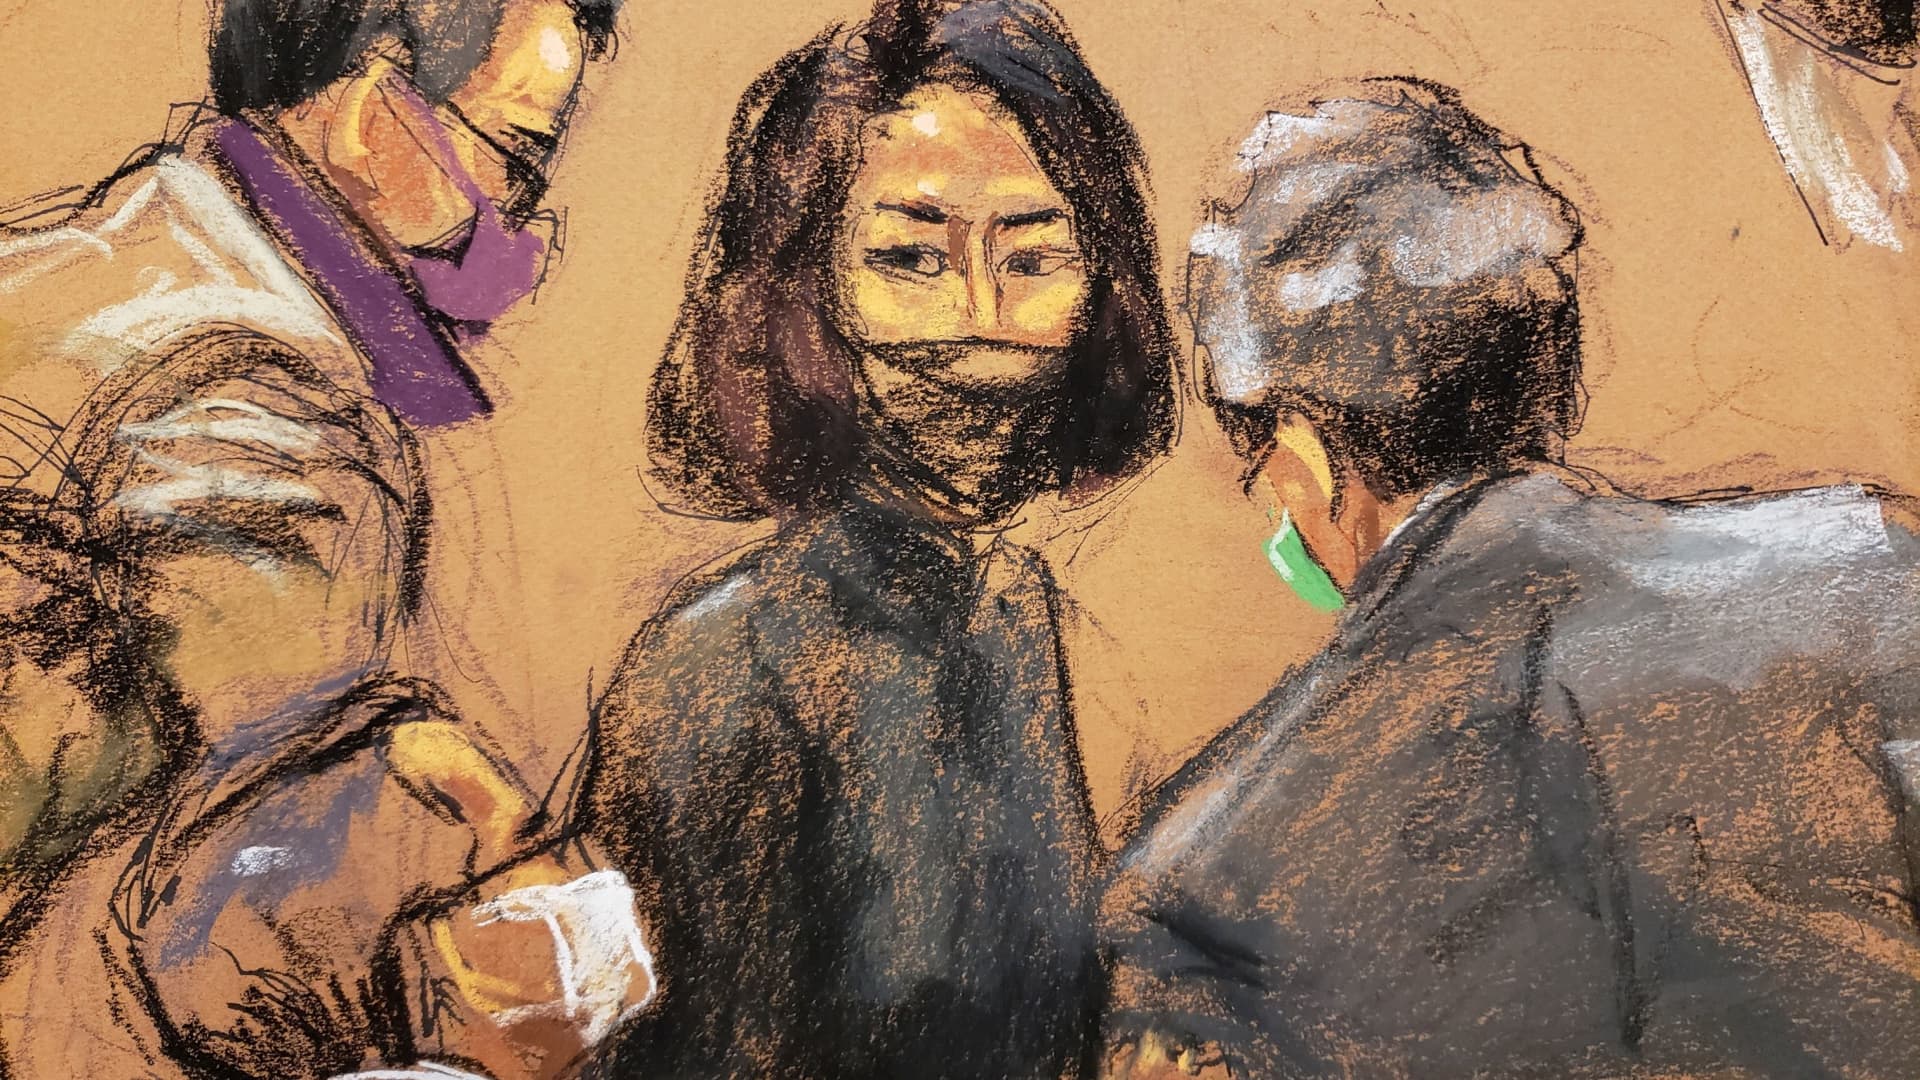 Ghislaine Maxwell speaks with her attorneys during the trial of Maxwell, the Jeffrey Epstein associate accused of sex trafficking, in a courtroom sketch in New York City, December 17, 2021.